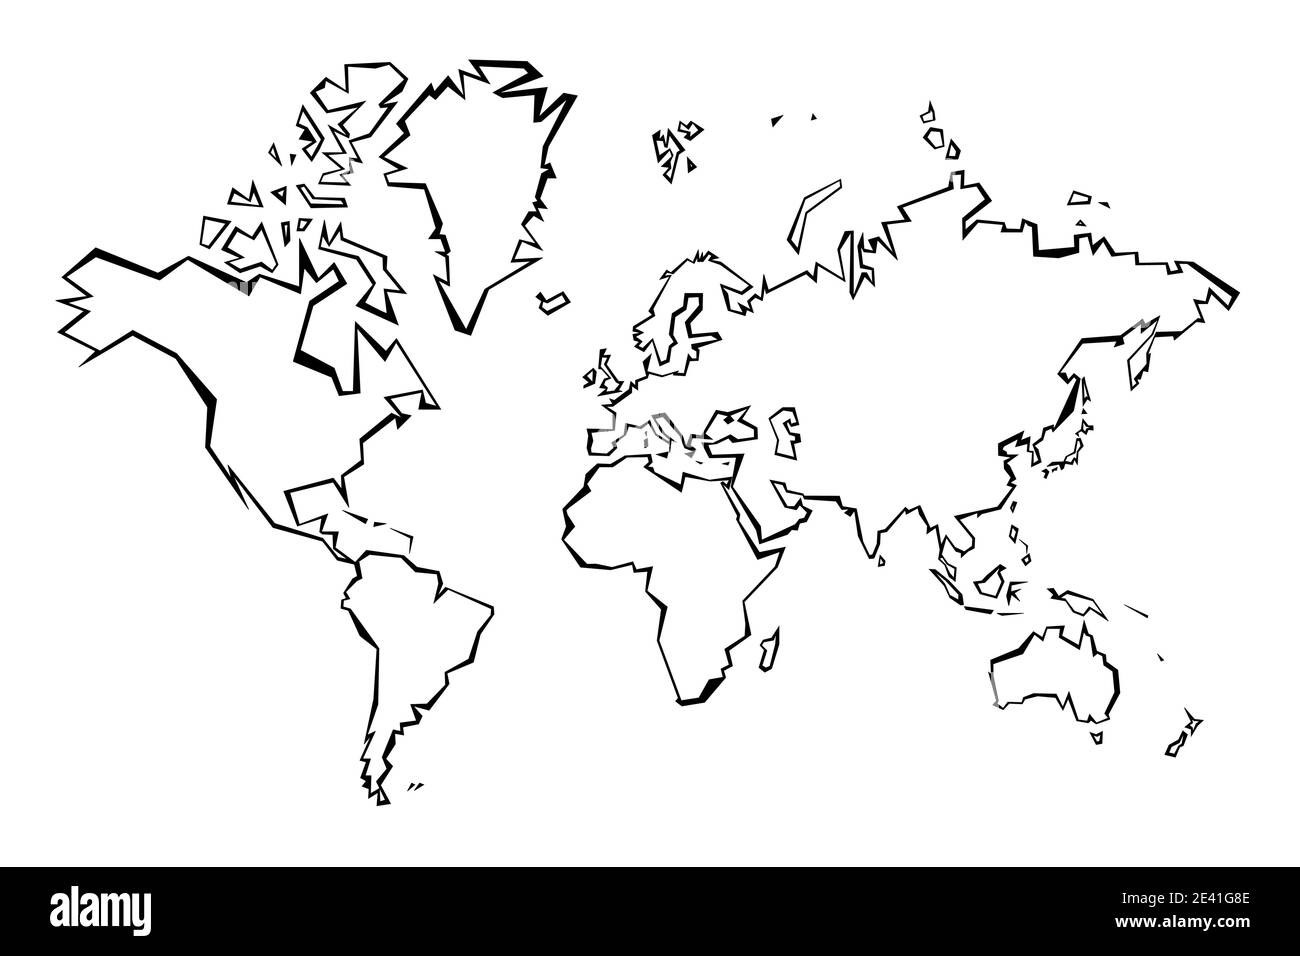 World Map Outline Black And White Stock Photos Images Alamy